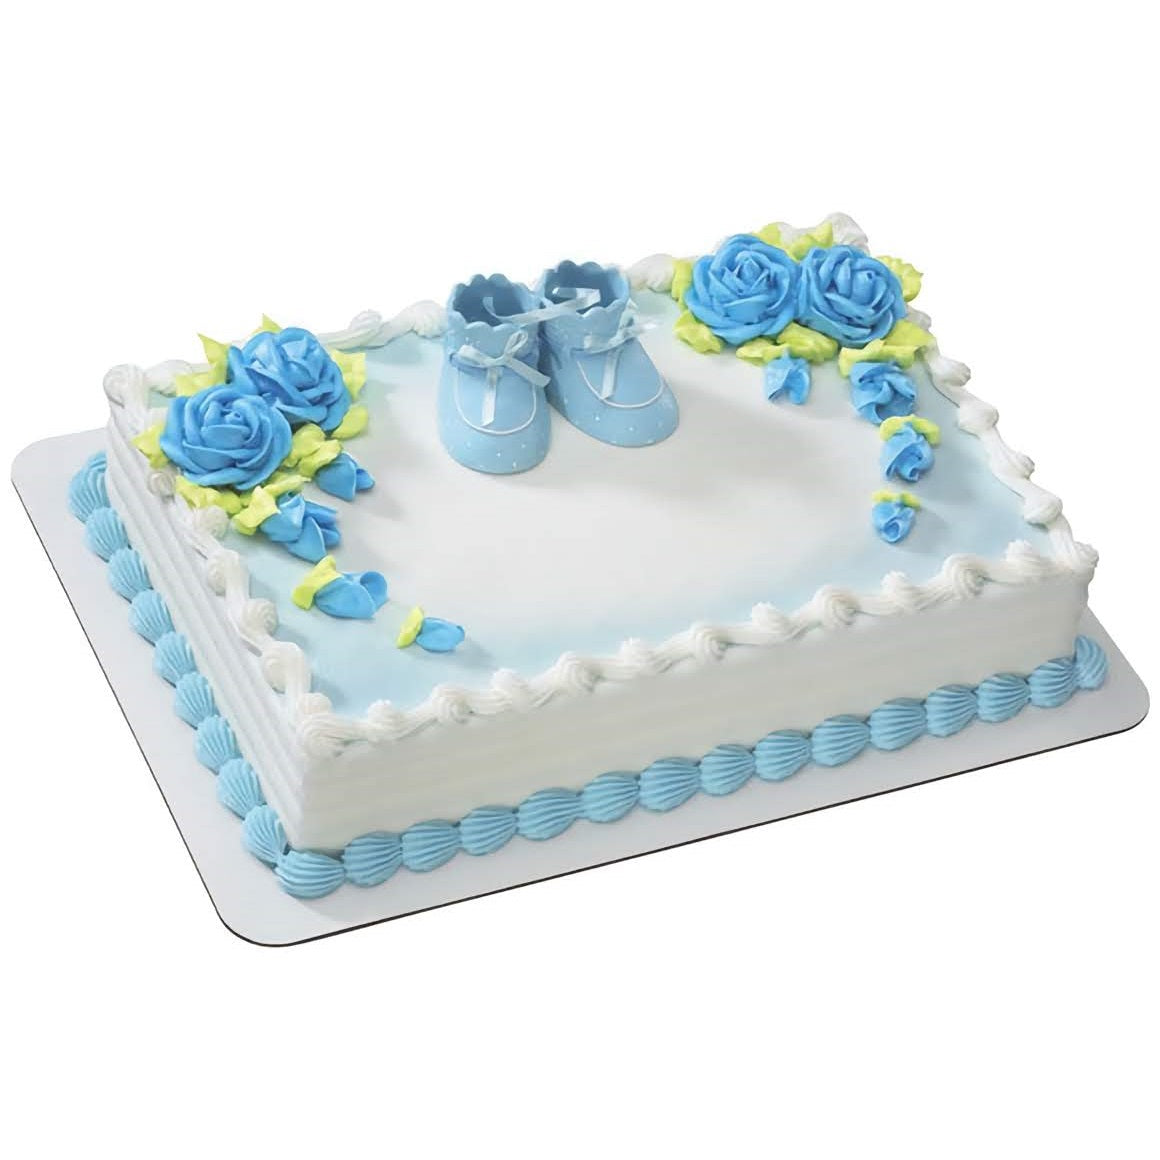 Elegant baby shower cake with blue booties topper and blue and yellow floral decorations, ideal for celebrating a new baby boy.